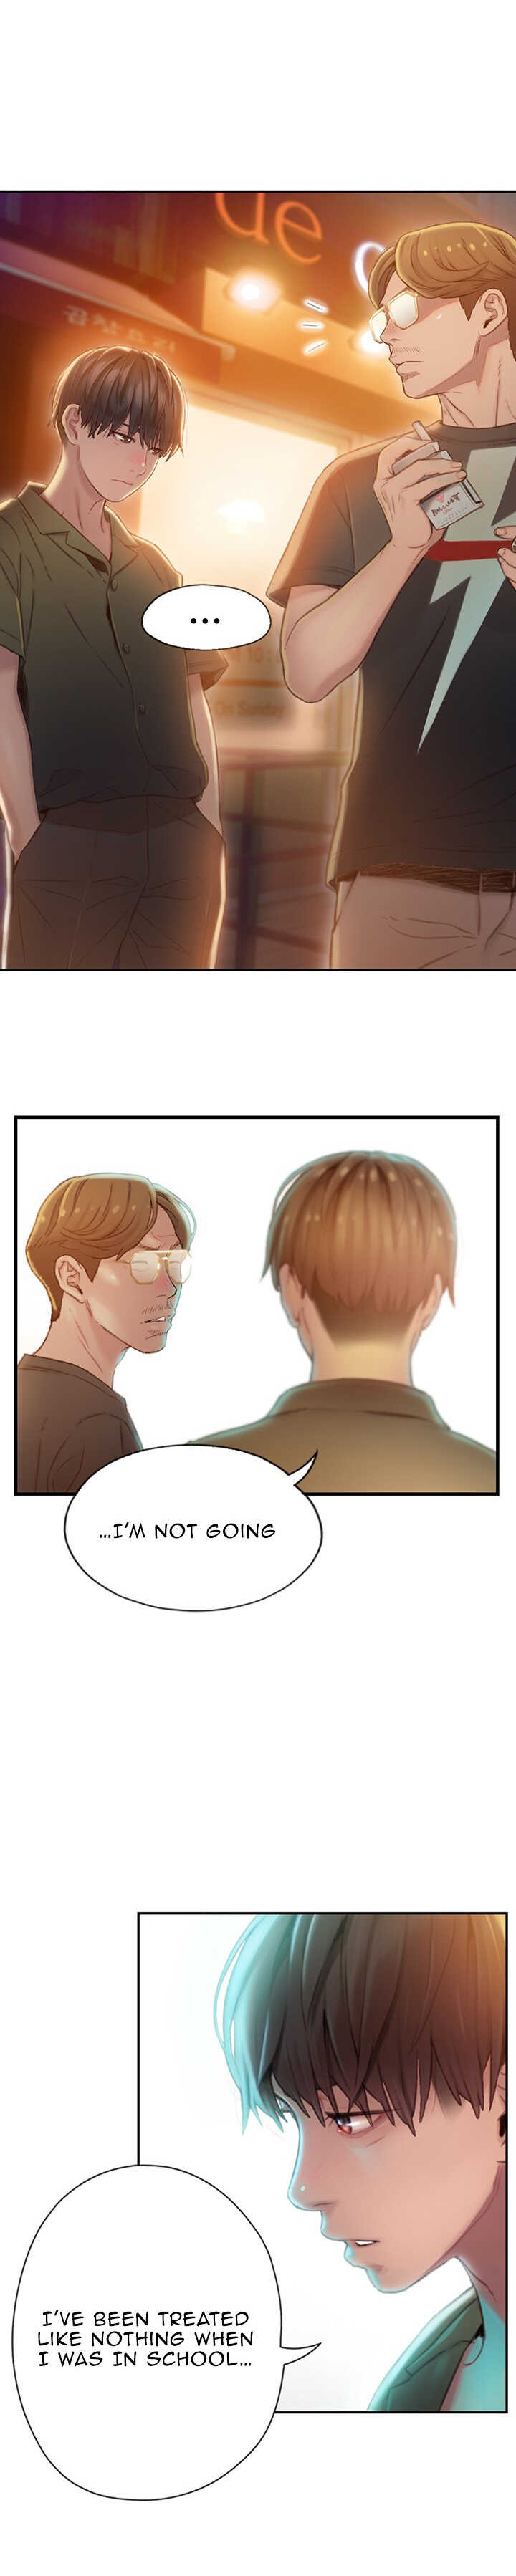 [Park Hyeongjun] Love Limit Exceeded (01-27) Ongoing - Page 27